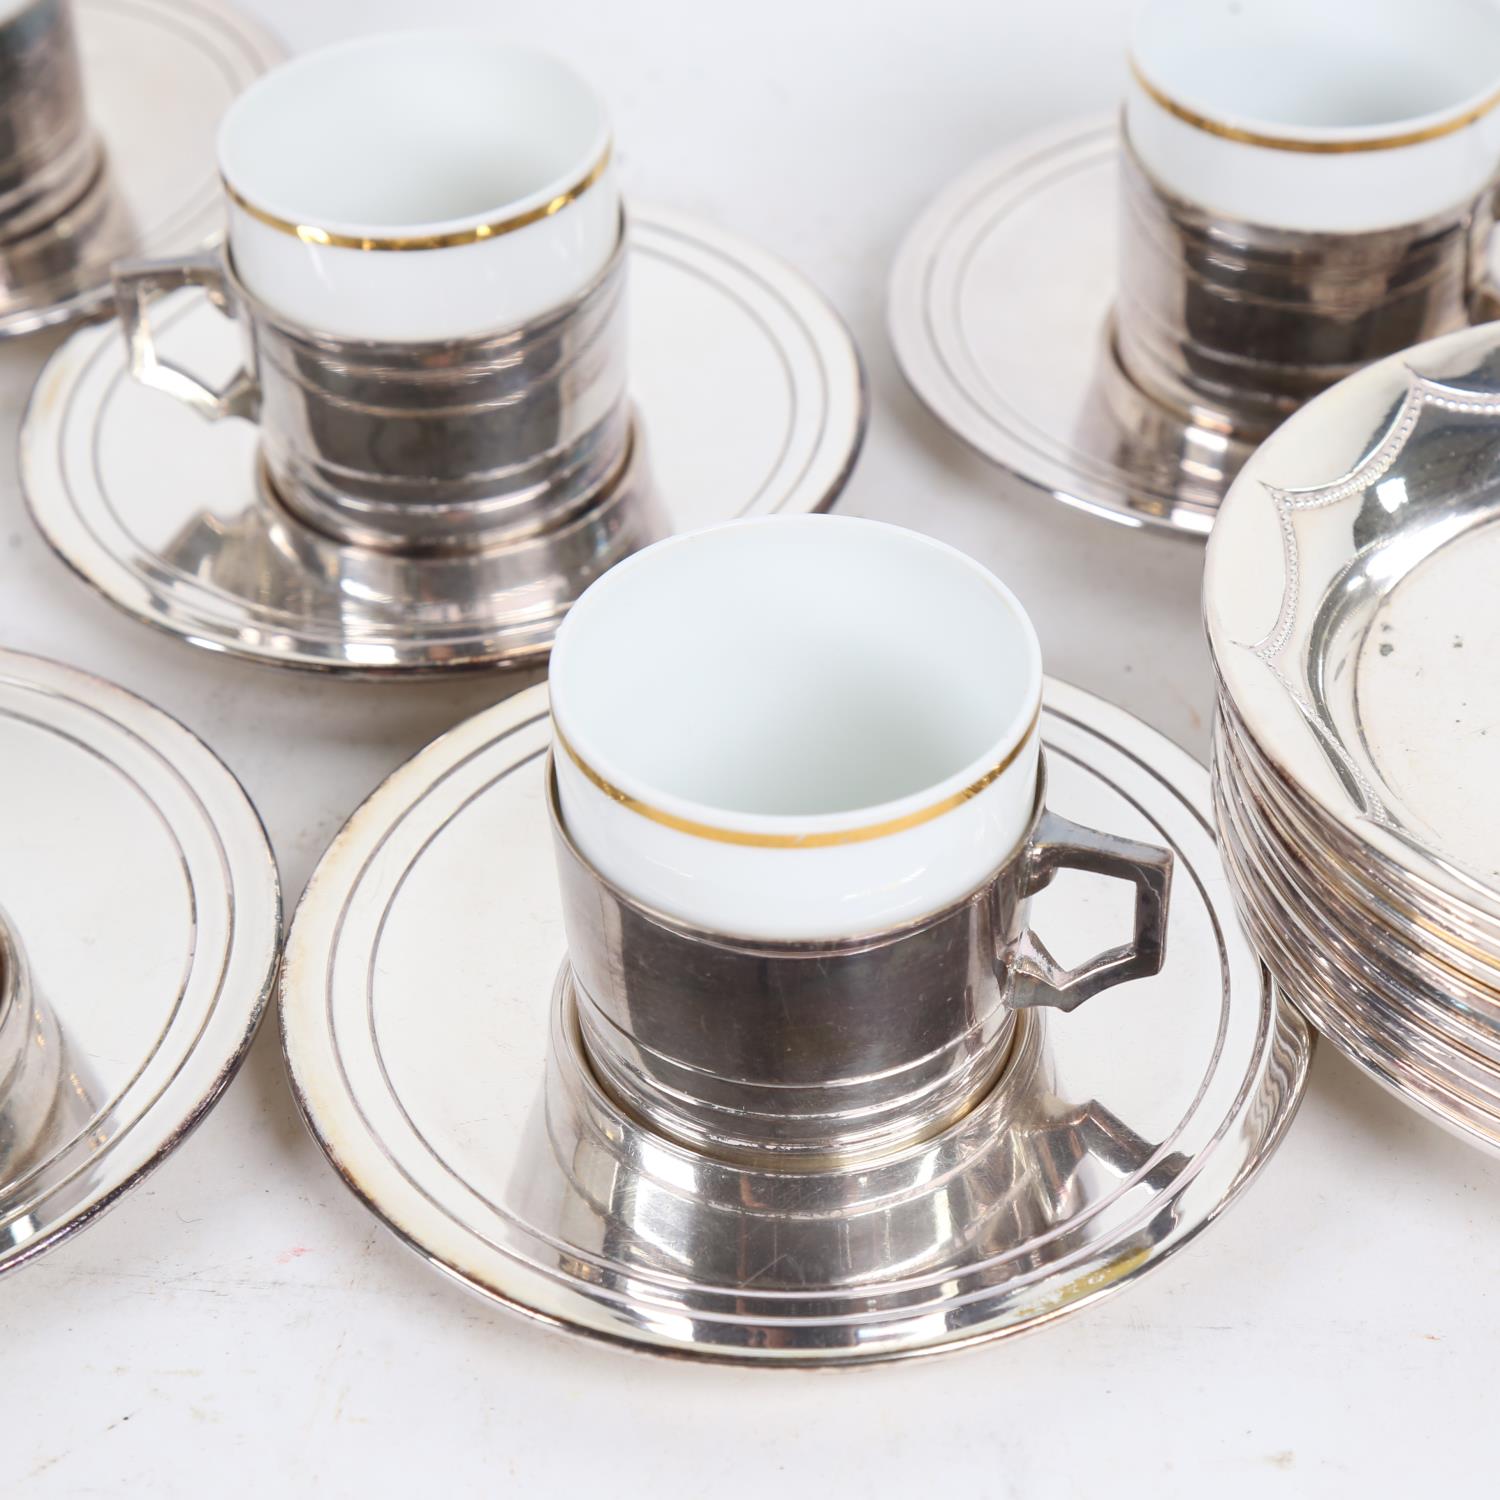 A set of 6 WMF plated coffee can holders and saucers, with Rosenthal ceramic inserts, a set of 10 - Image 2 of 2